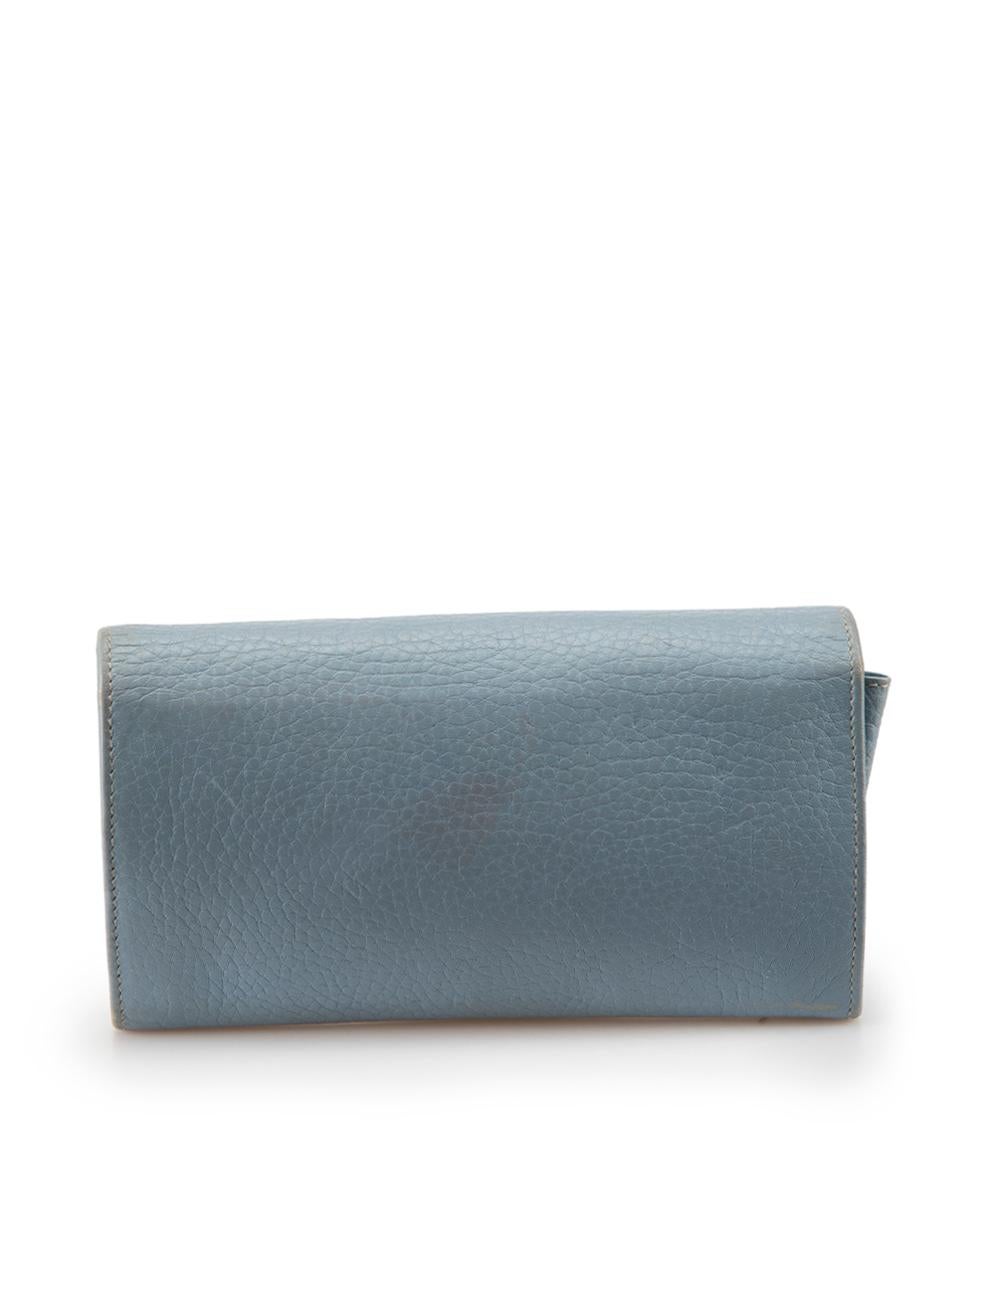 Dolce & Gabbana Blue Flap Continental Wallet In Good Condition For Sale In London, GB